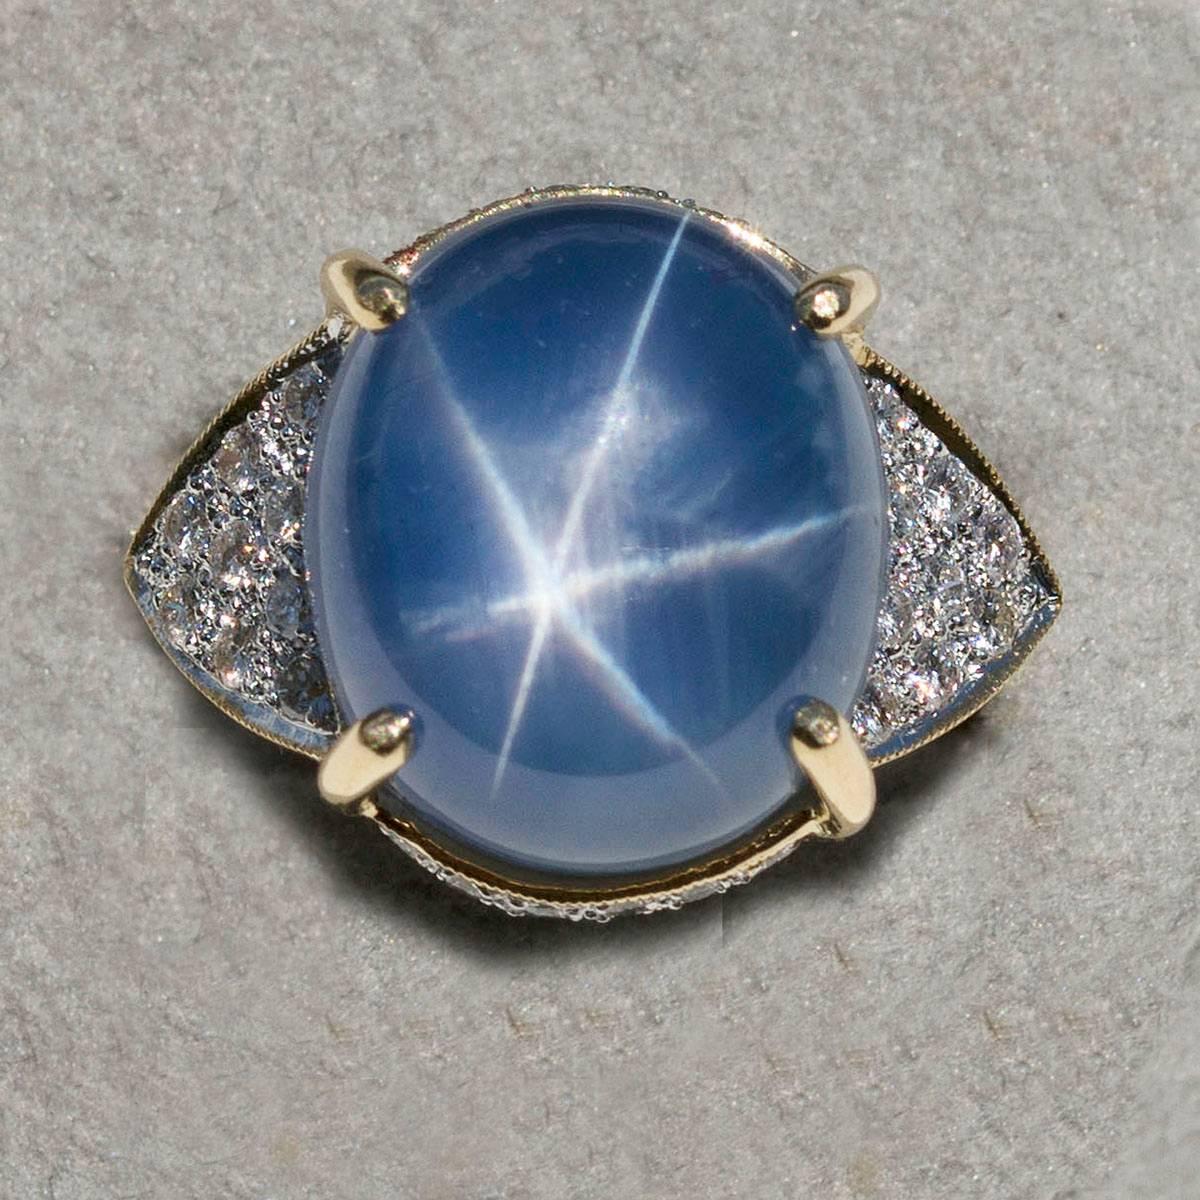 AGL certified 25.34 carat Burmese Star Sapphire set in 18k mounting with 52 round brilliant diamonds weighing 1.30 carats, 12.47g